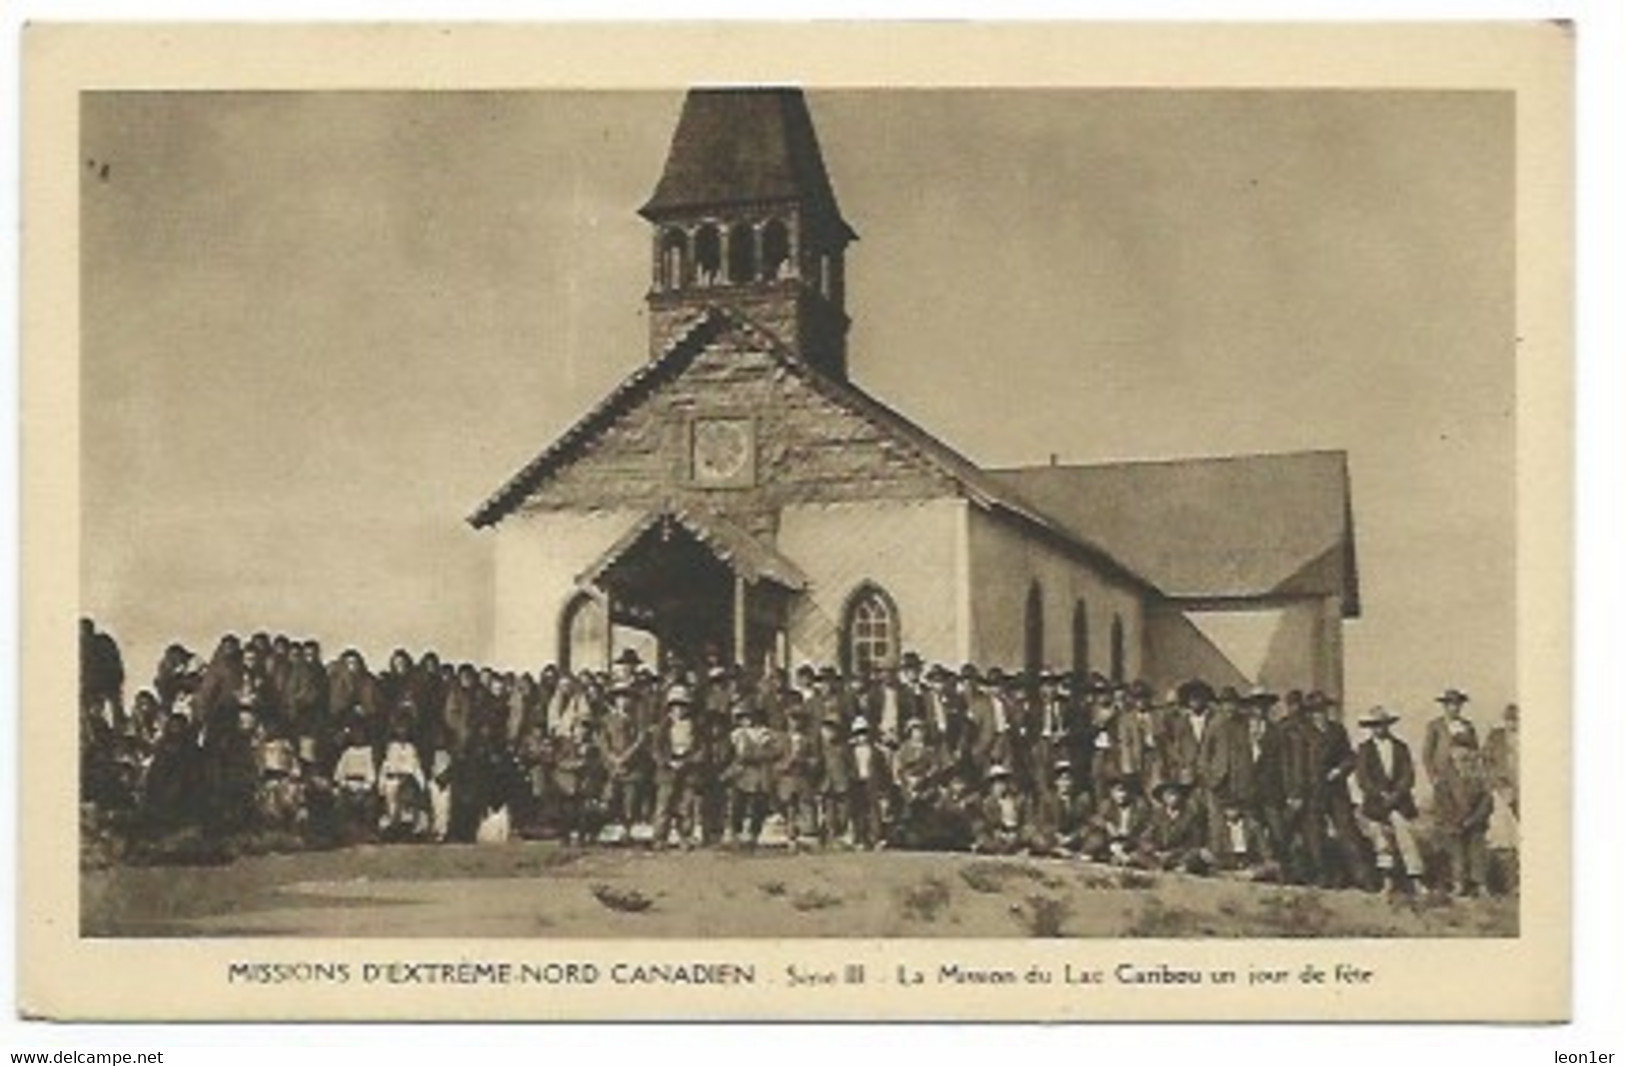 CANADA - MISSIONS ESQUIMAUDES - 1 LOT 35 CPA - EXTREME NORD